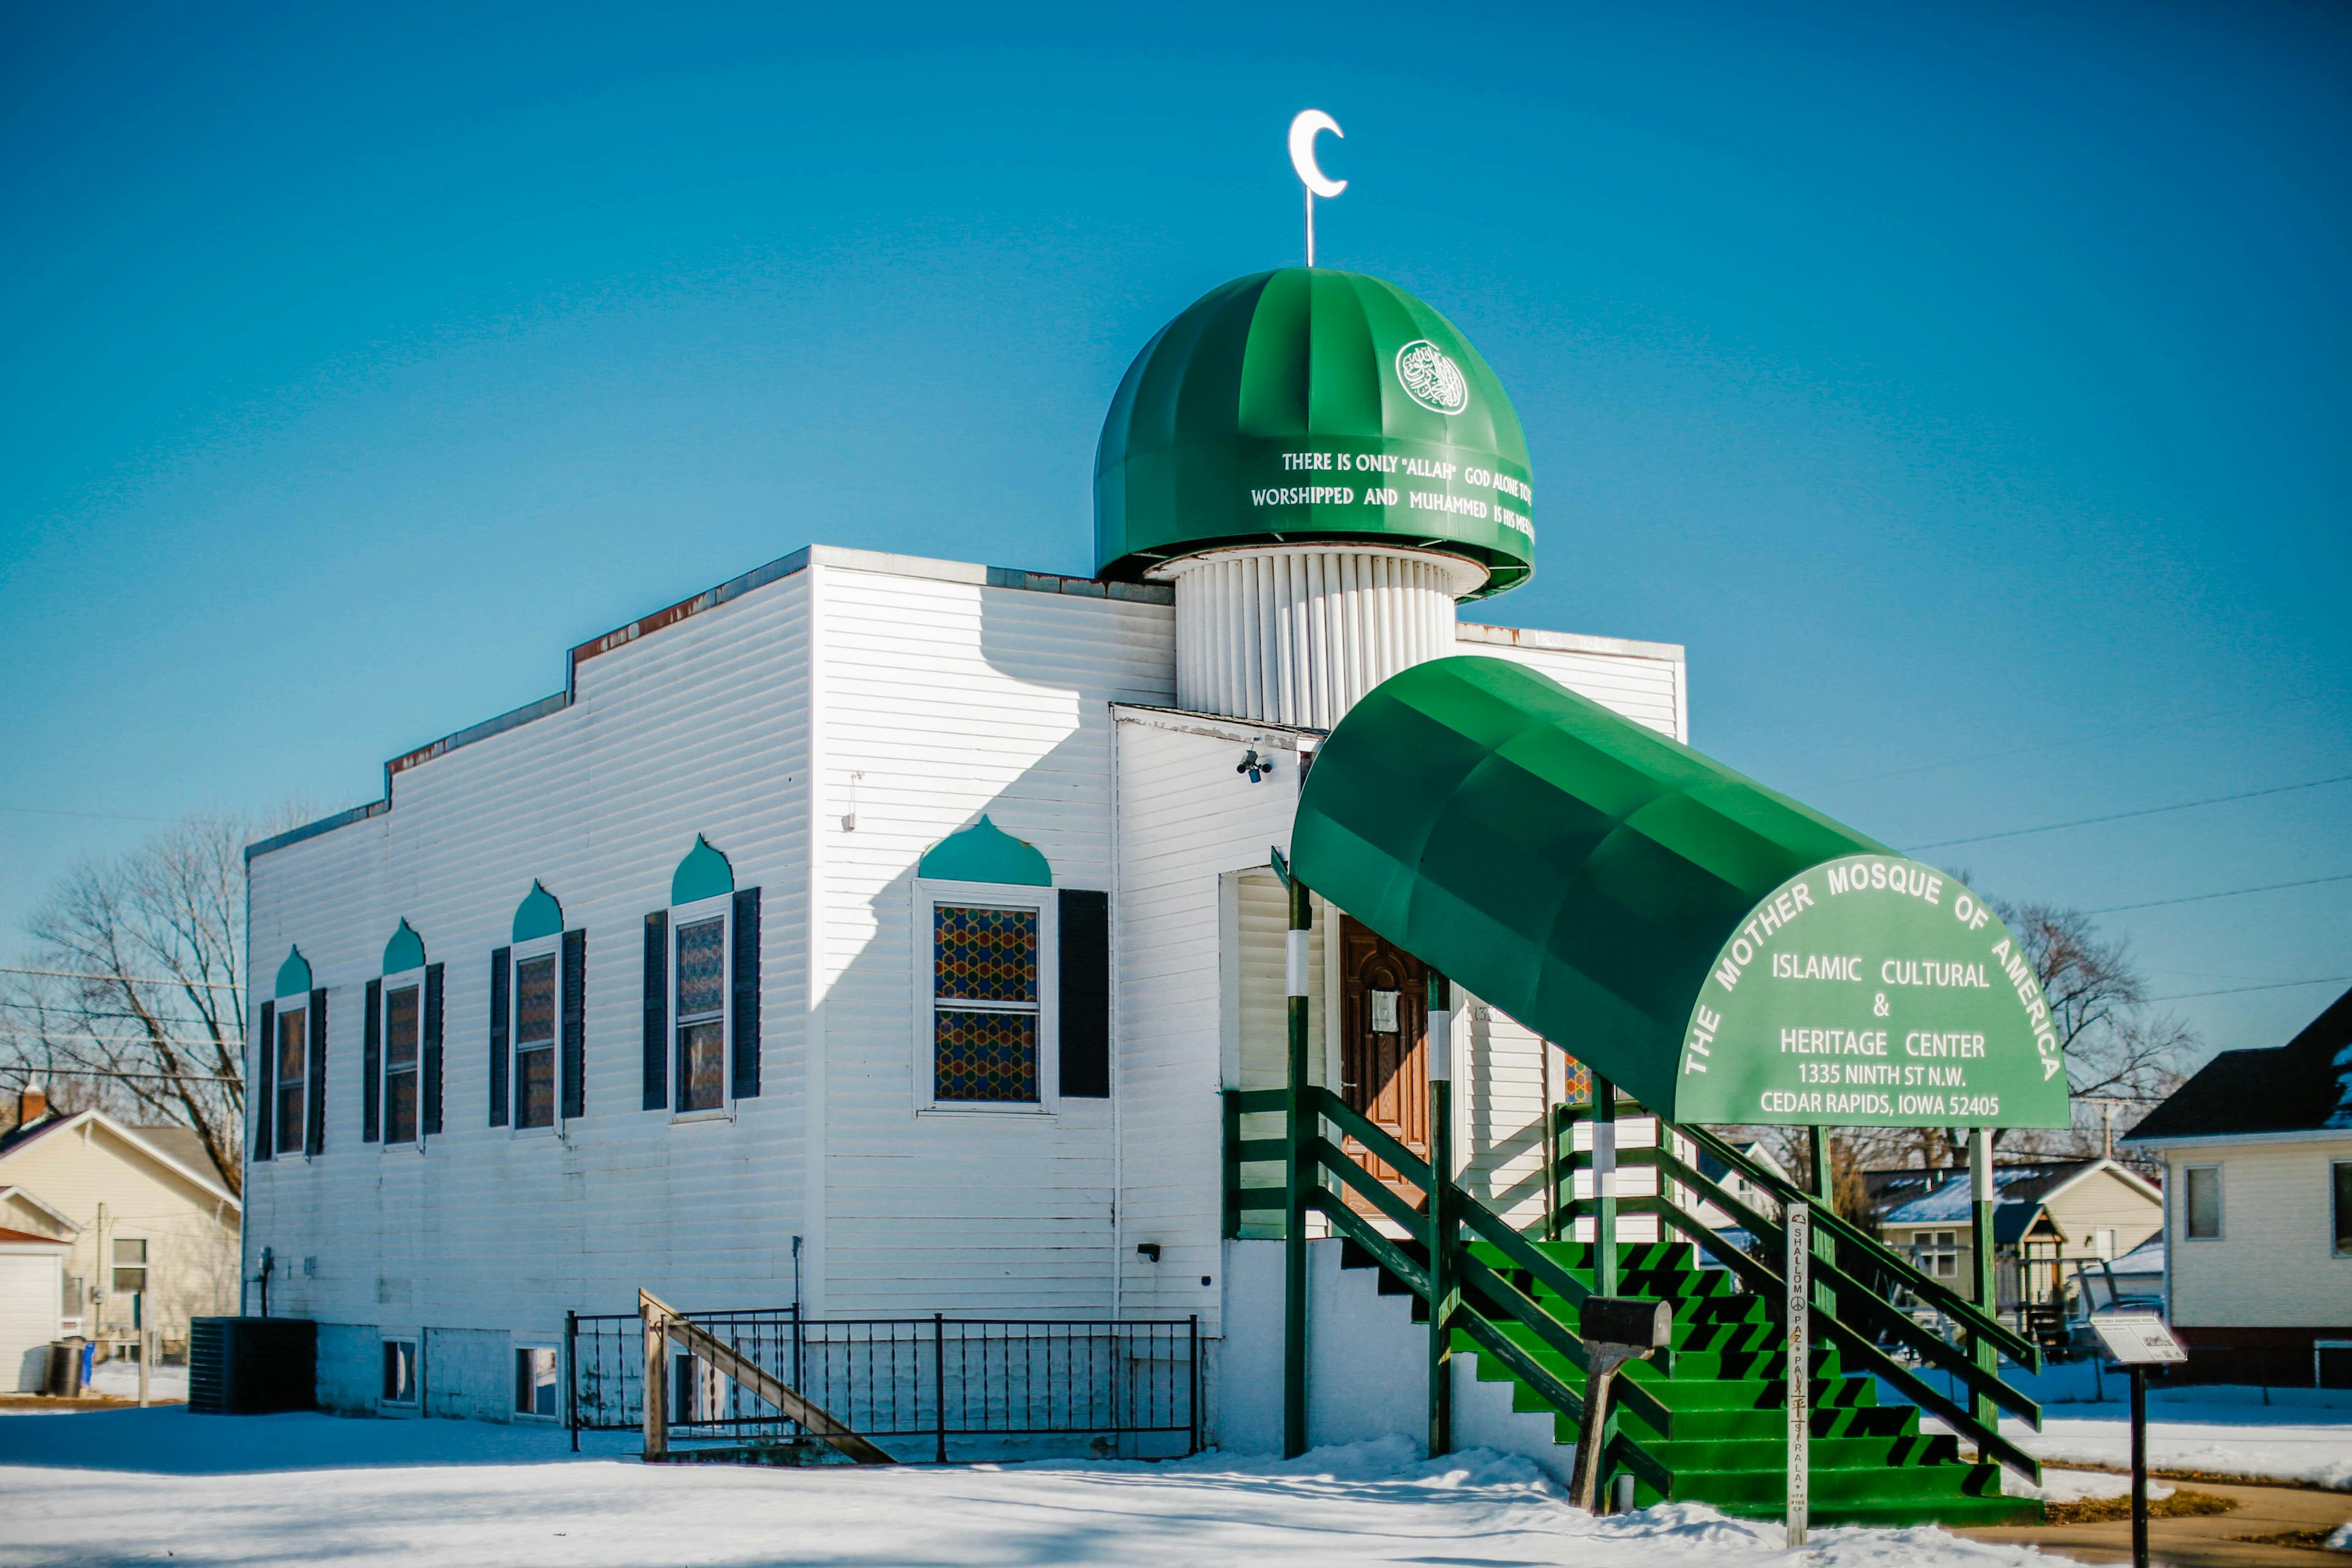 How America’s Oldest Mosque Became an Icon of the Midwest